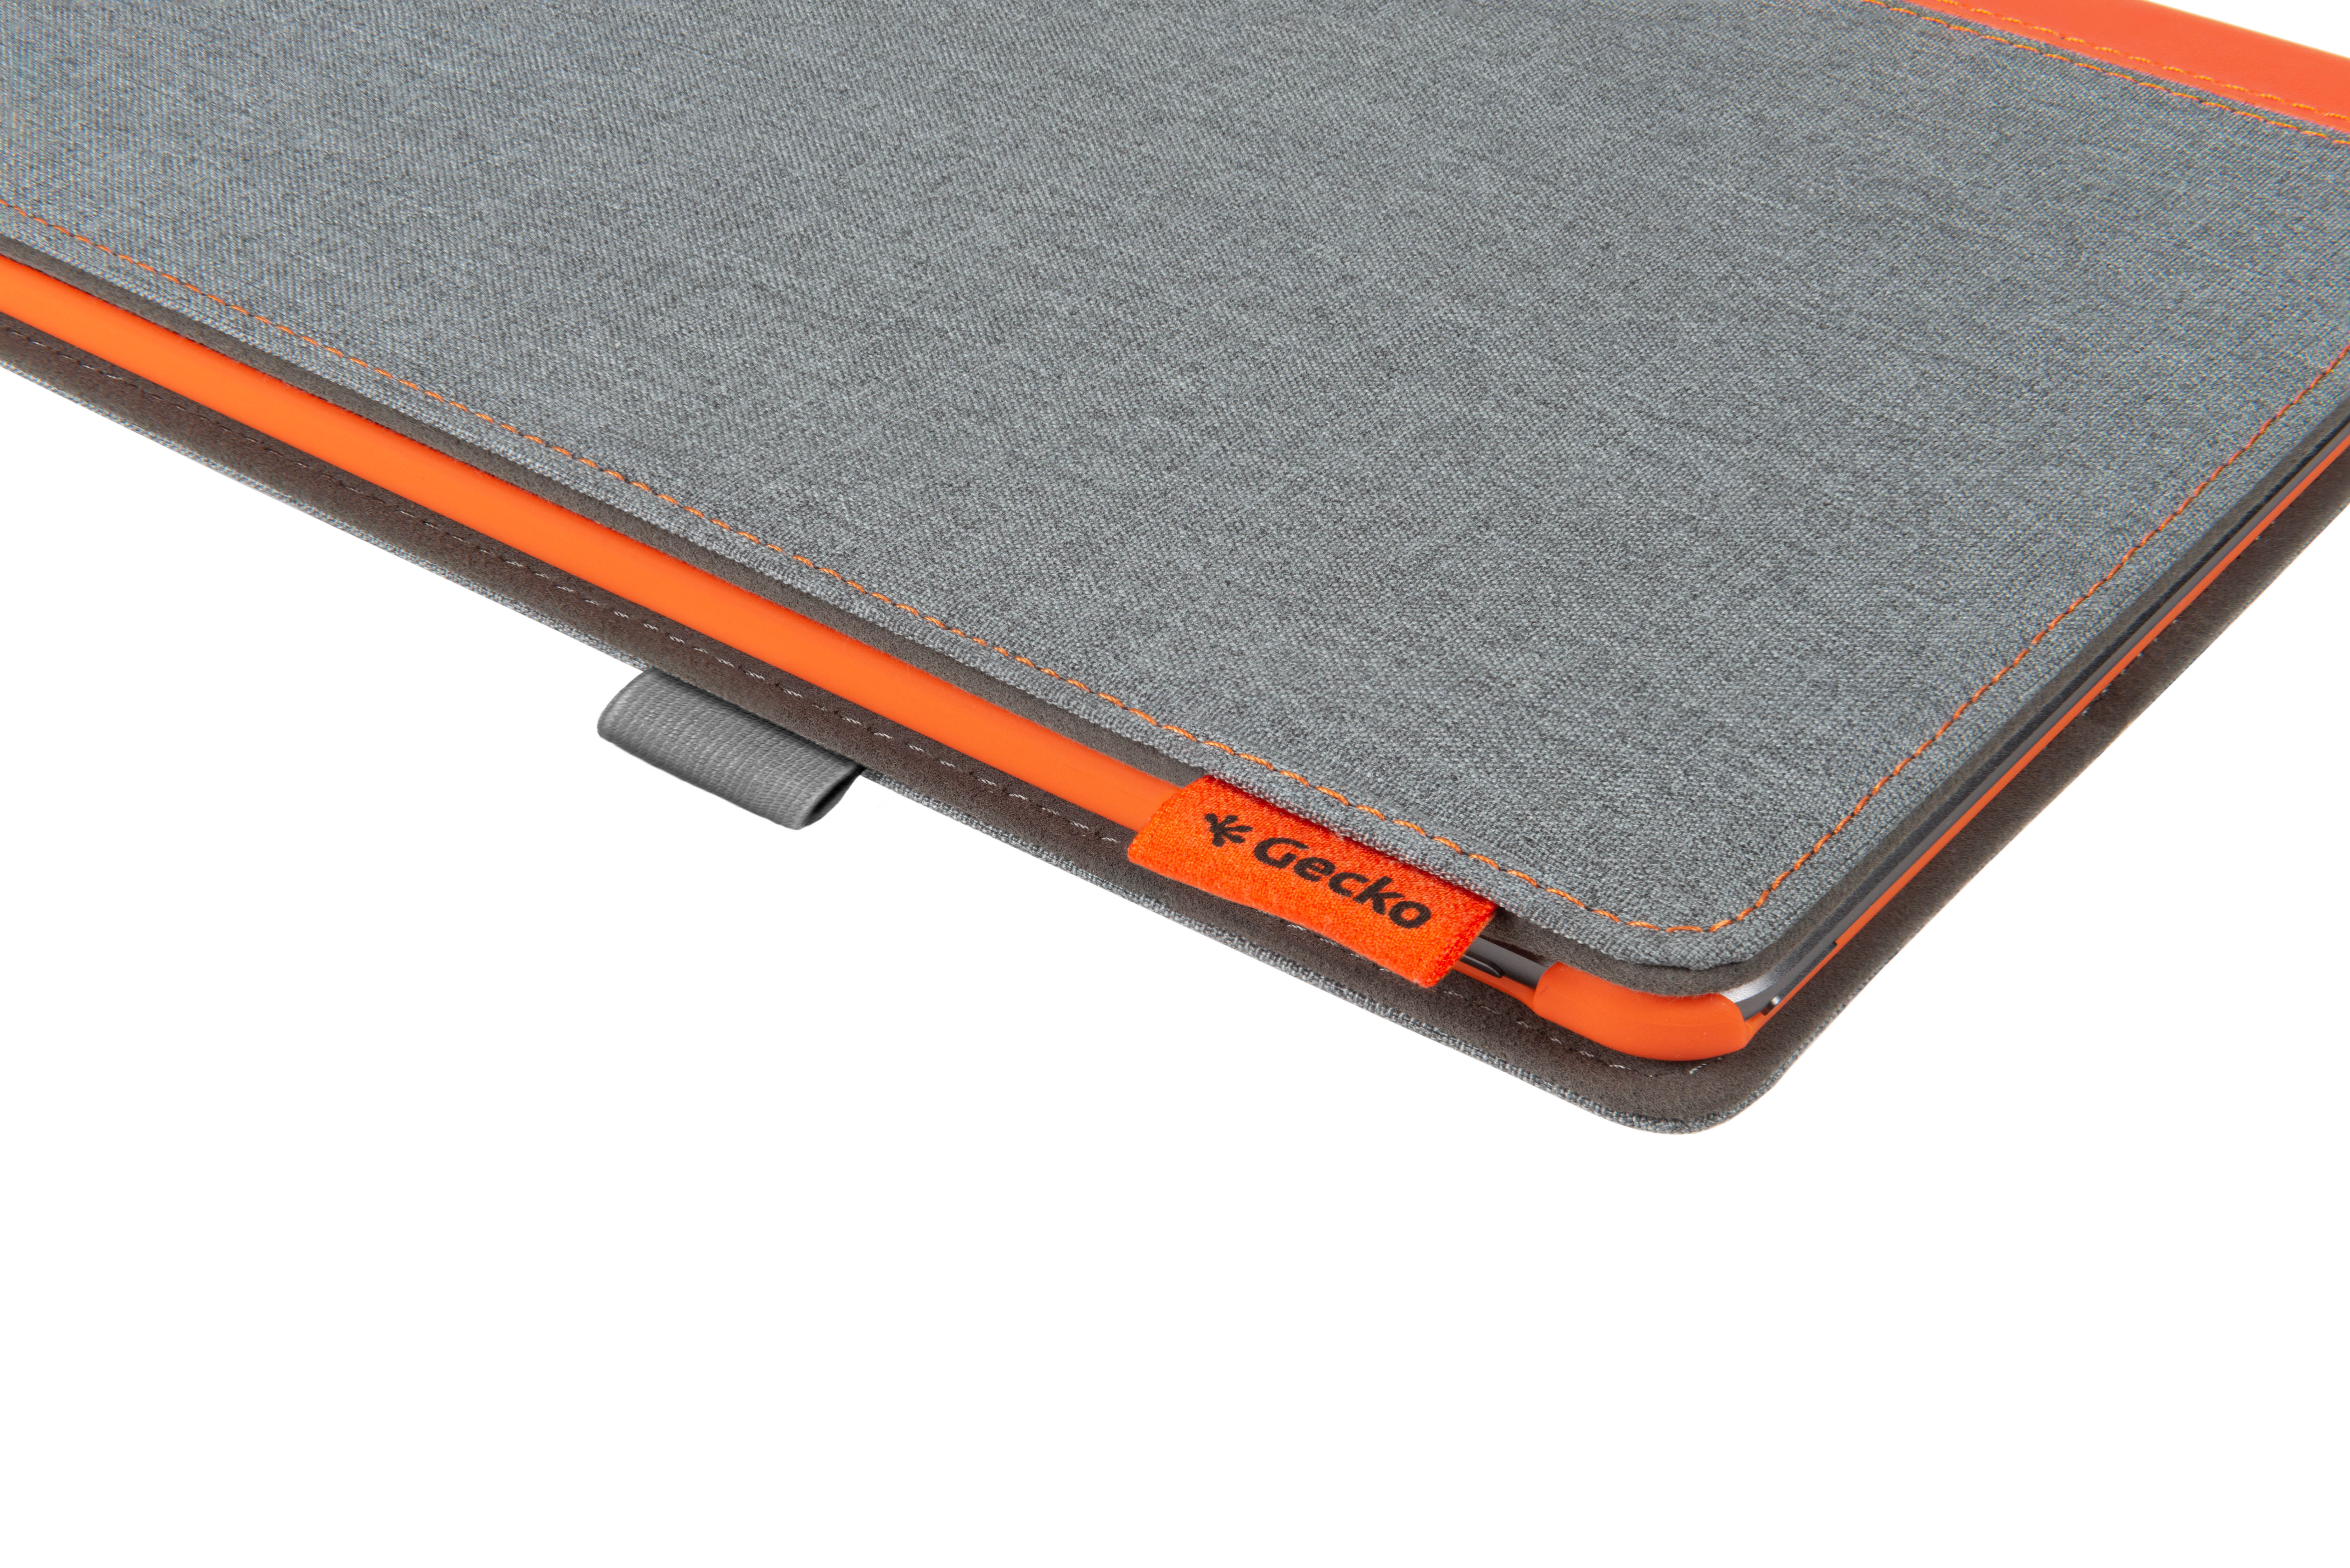 Pro Bookcover Leather, iPad iPad (2017) Easy-Click COVERS Grau,Orange Apple Hülle GECKO Cover Tablet PU (2019),Apple für 10.5 Air